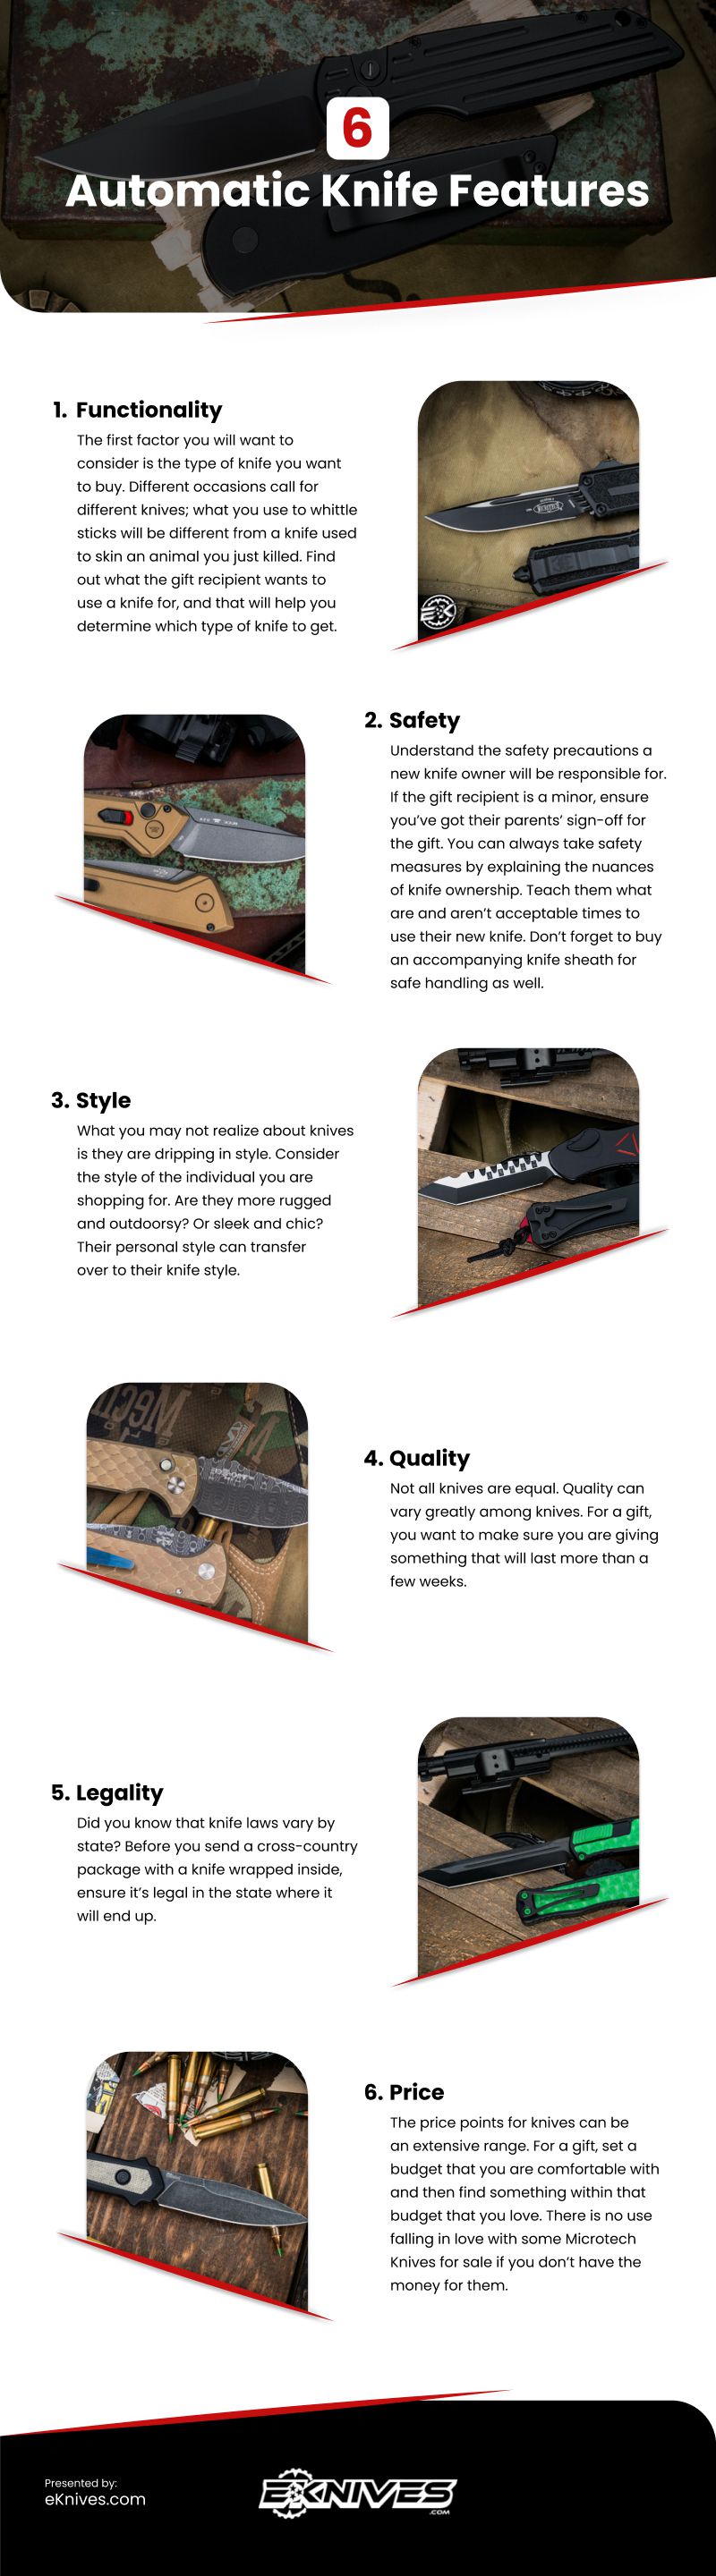 6 Automatic Knife Features Infographic